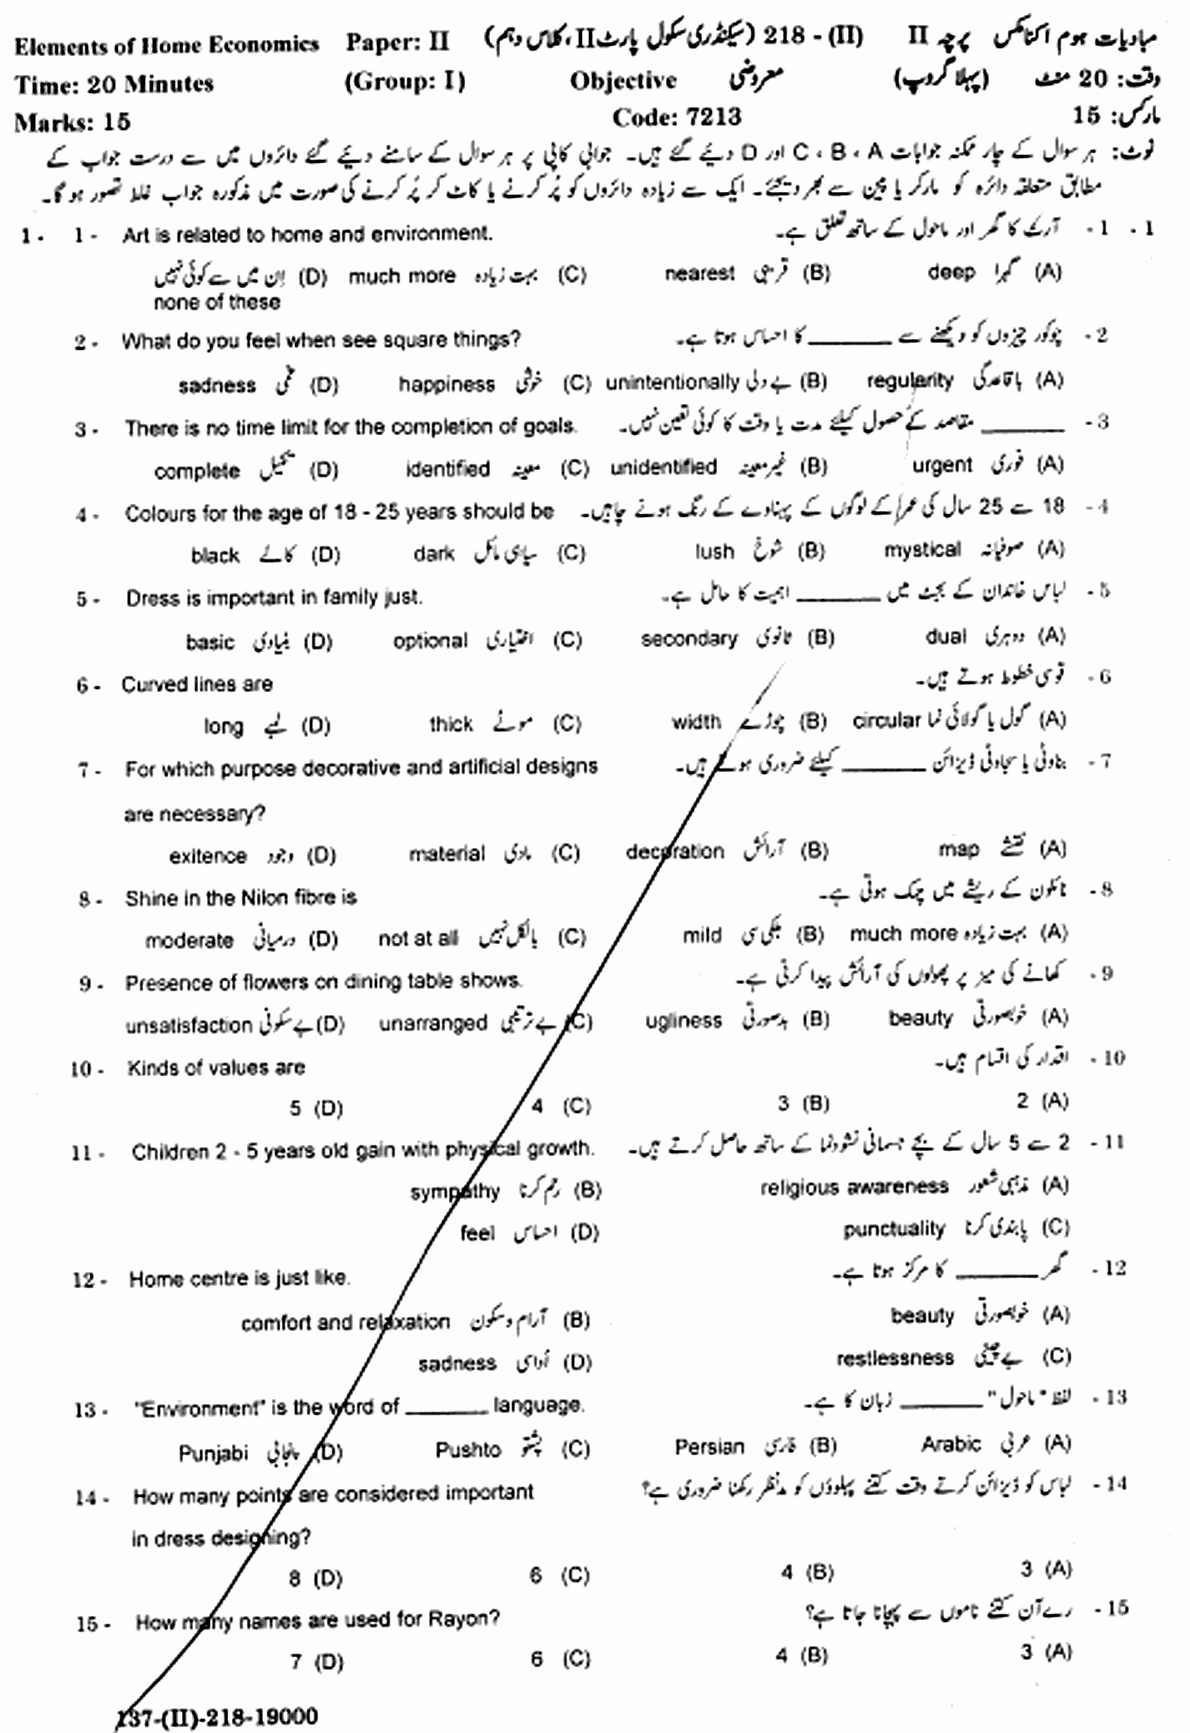 10th Class Elements Of Home Economics Paper 2018 Gujranwala Board Objective Group 1